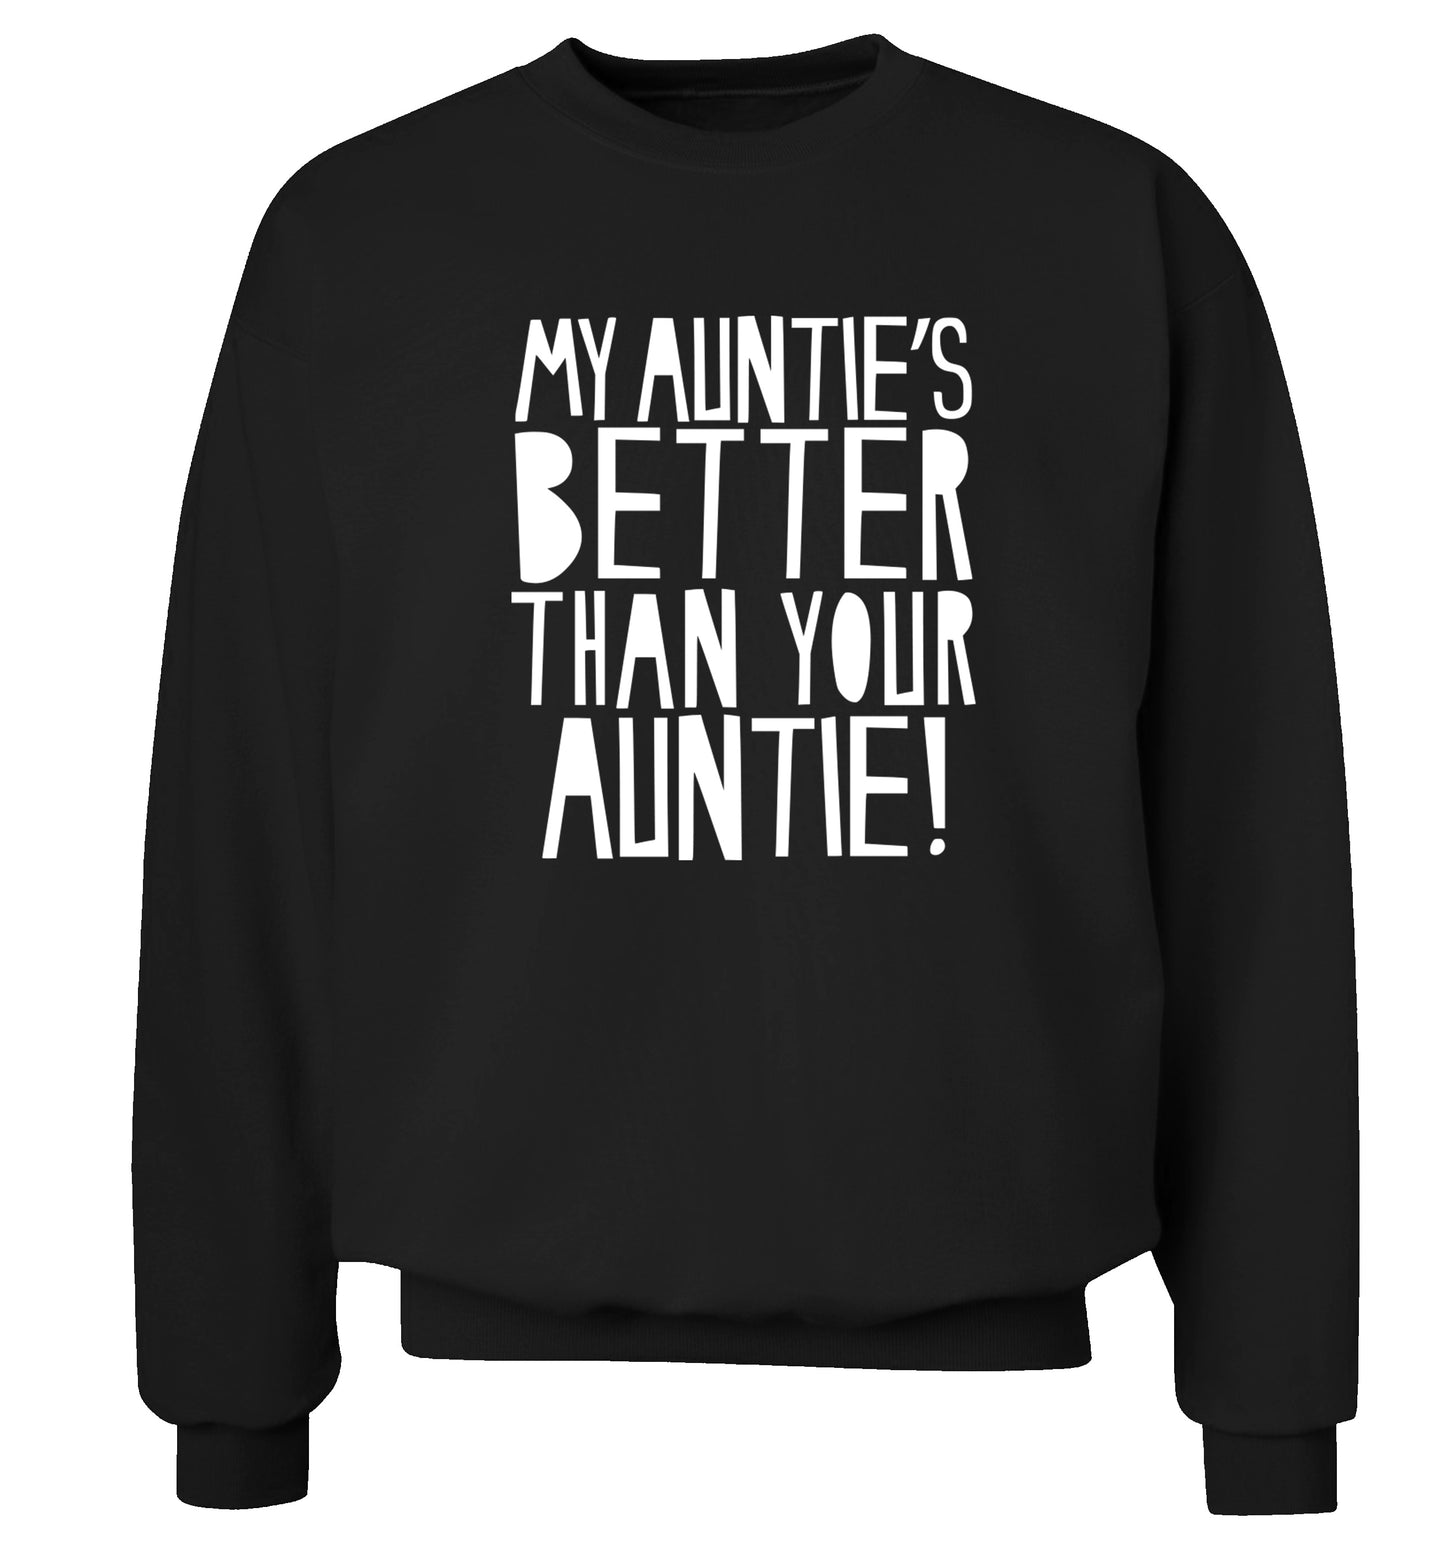 My auntie's better than your auntie Adult's unisex black Sweater 2XL